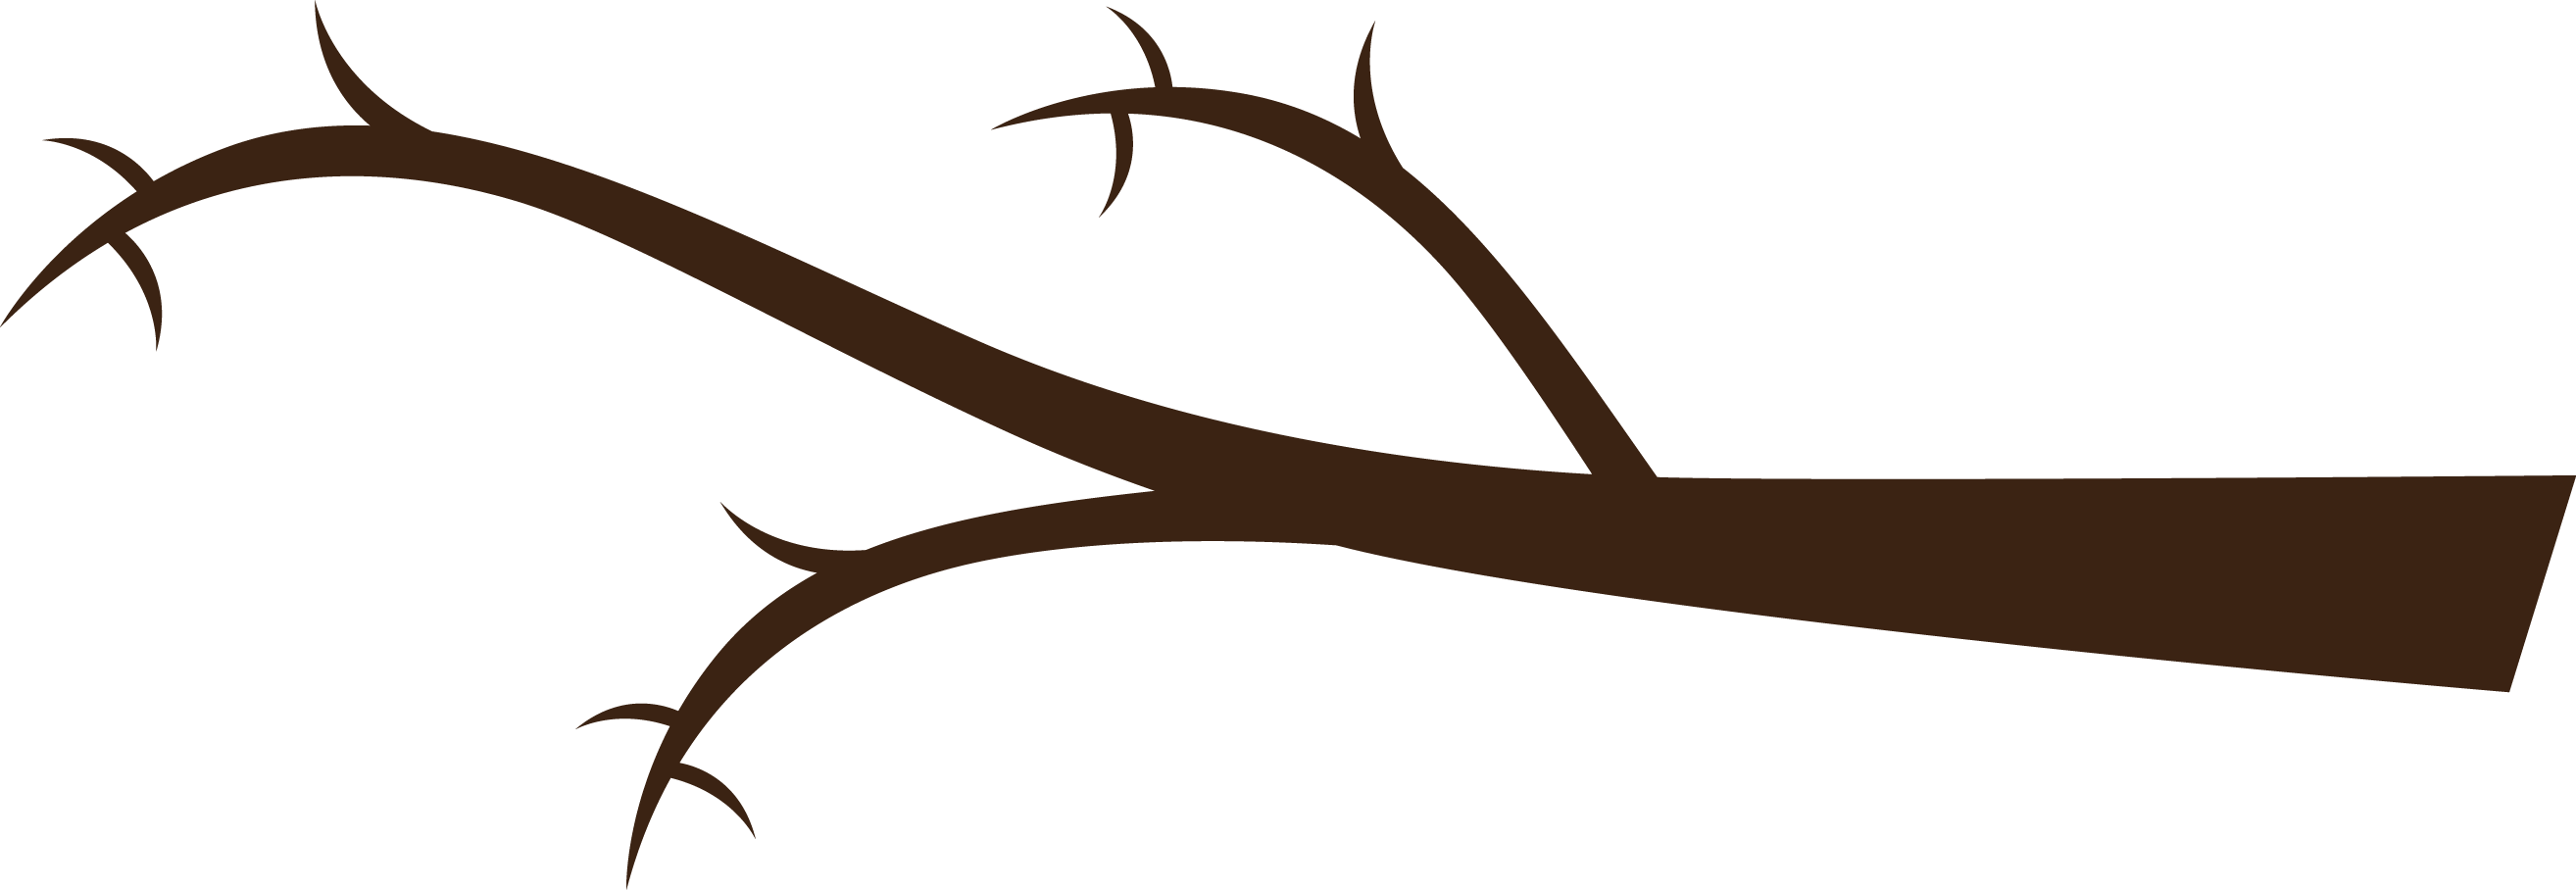 Clipart tree branch silhouette fall